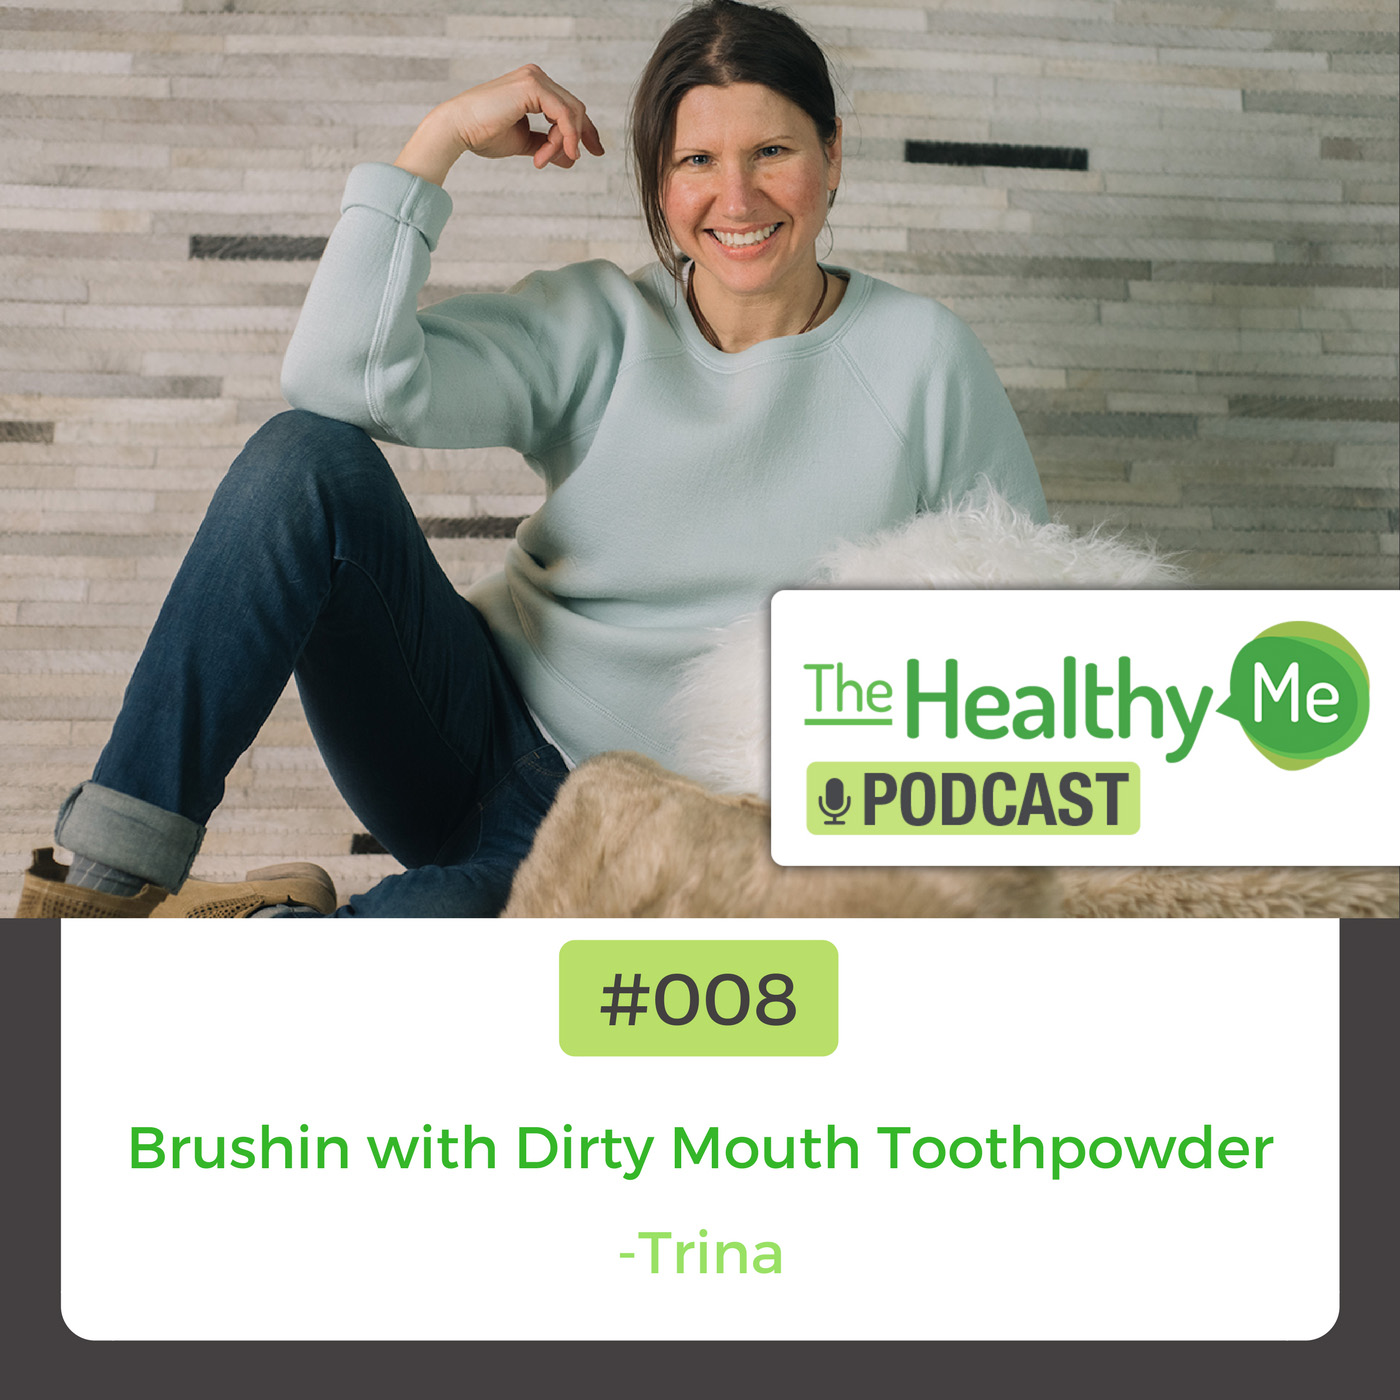 Brushin with Dirty Mouth Toothpowder | The Healthy Me Podcast Episode 008